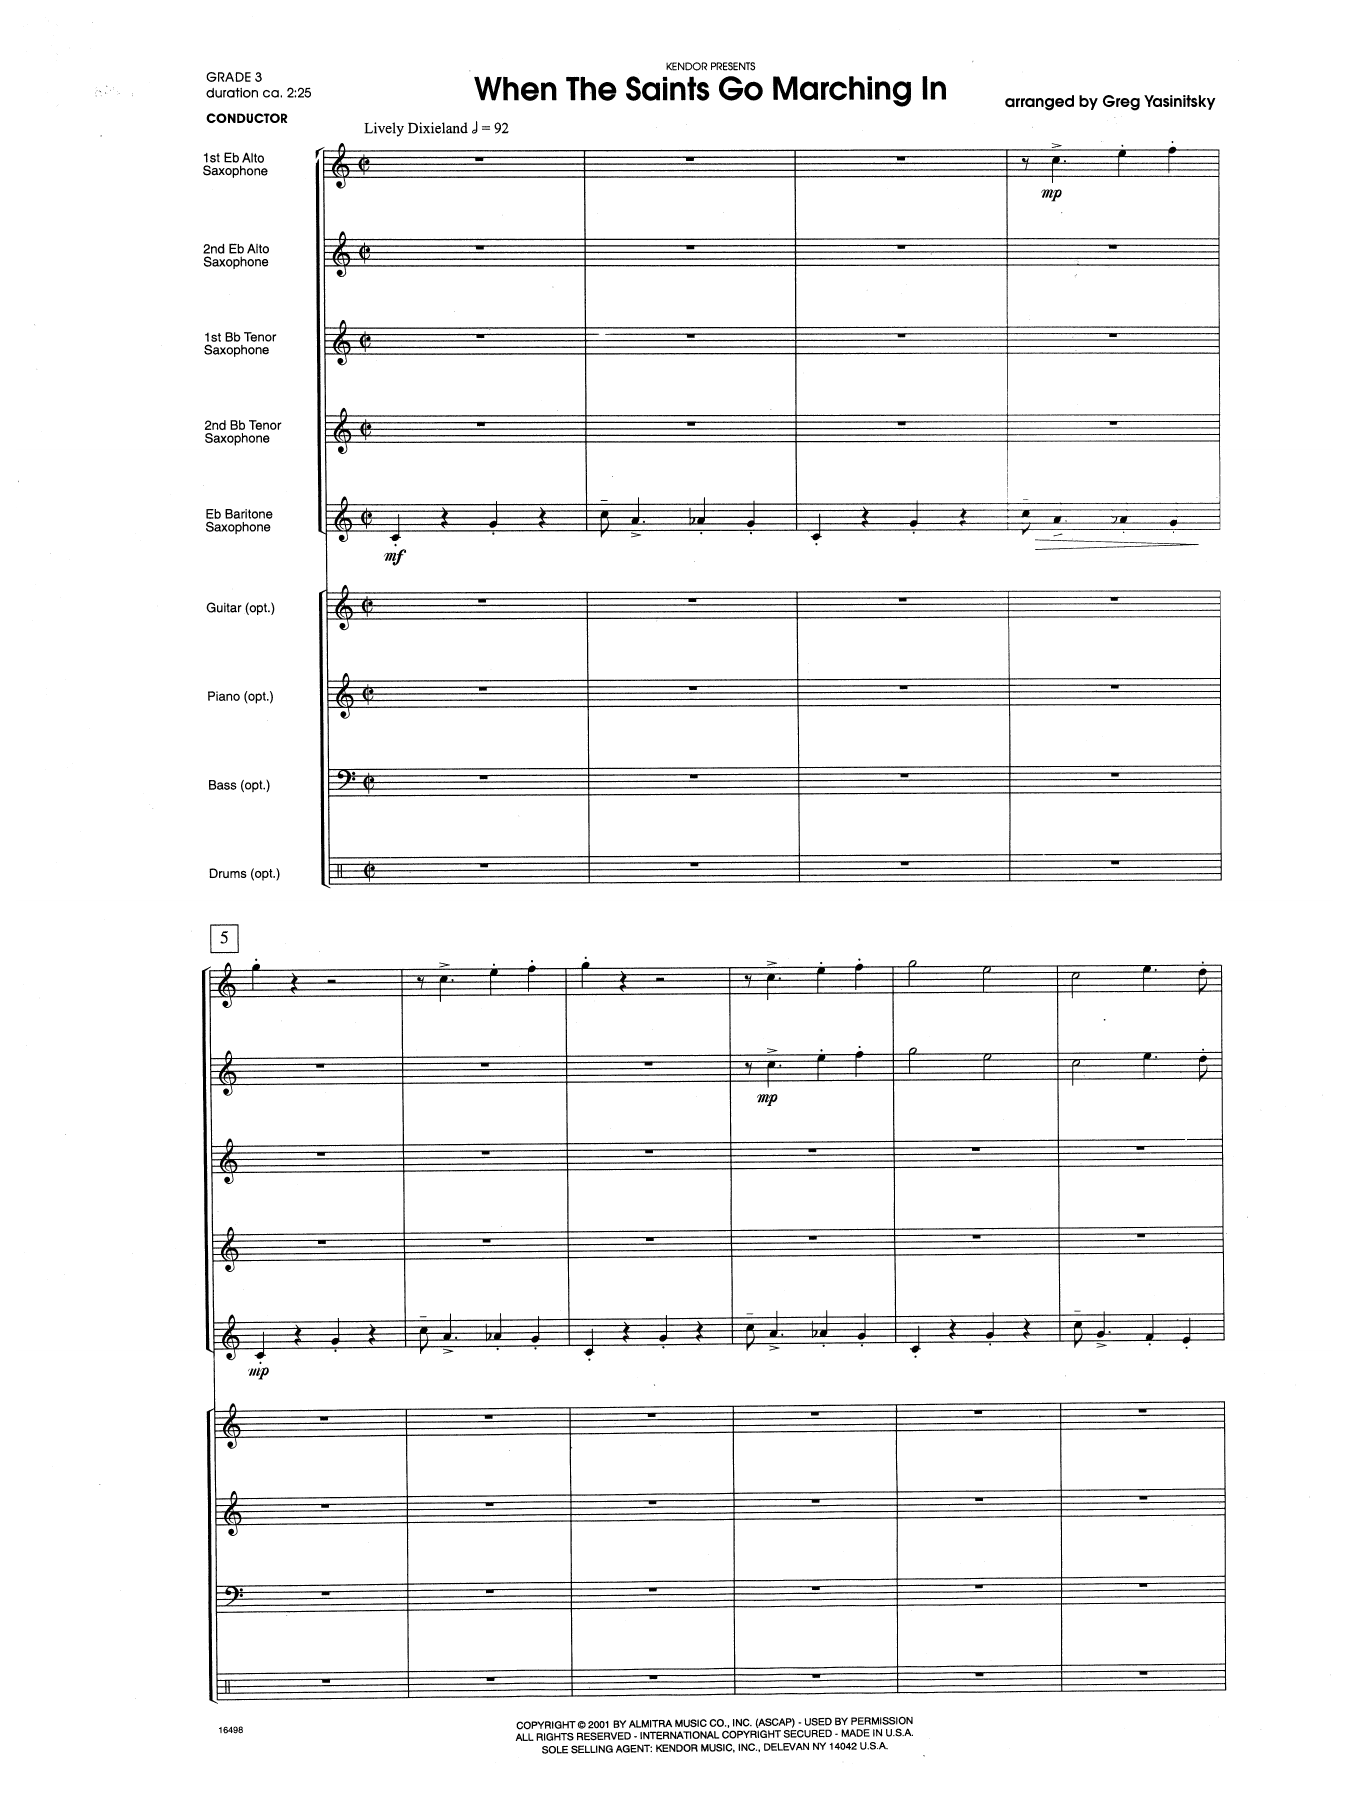 Gregory Yasinitsky When the Saints Go Marching In - Full Score sheet music notes and chords. Download Printable PDF.